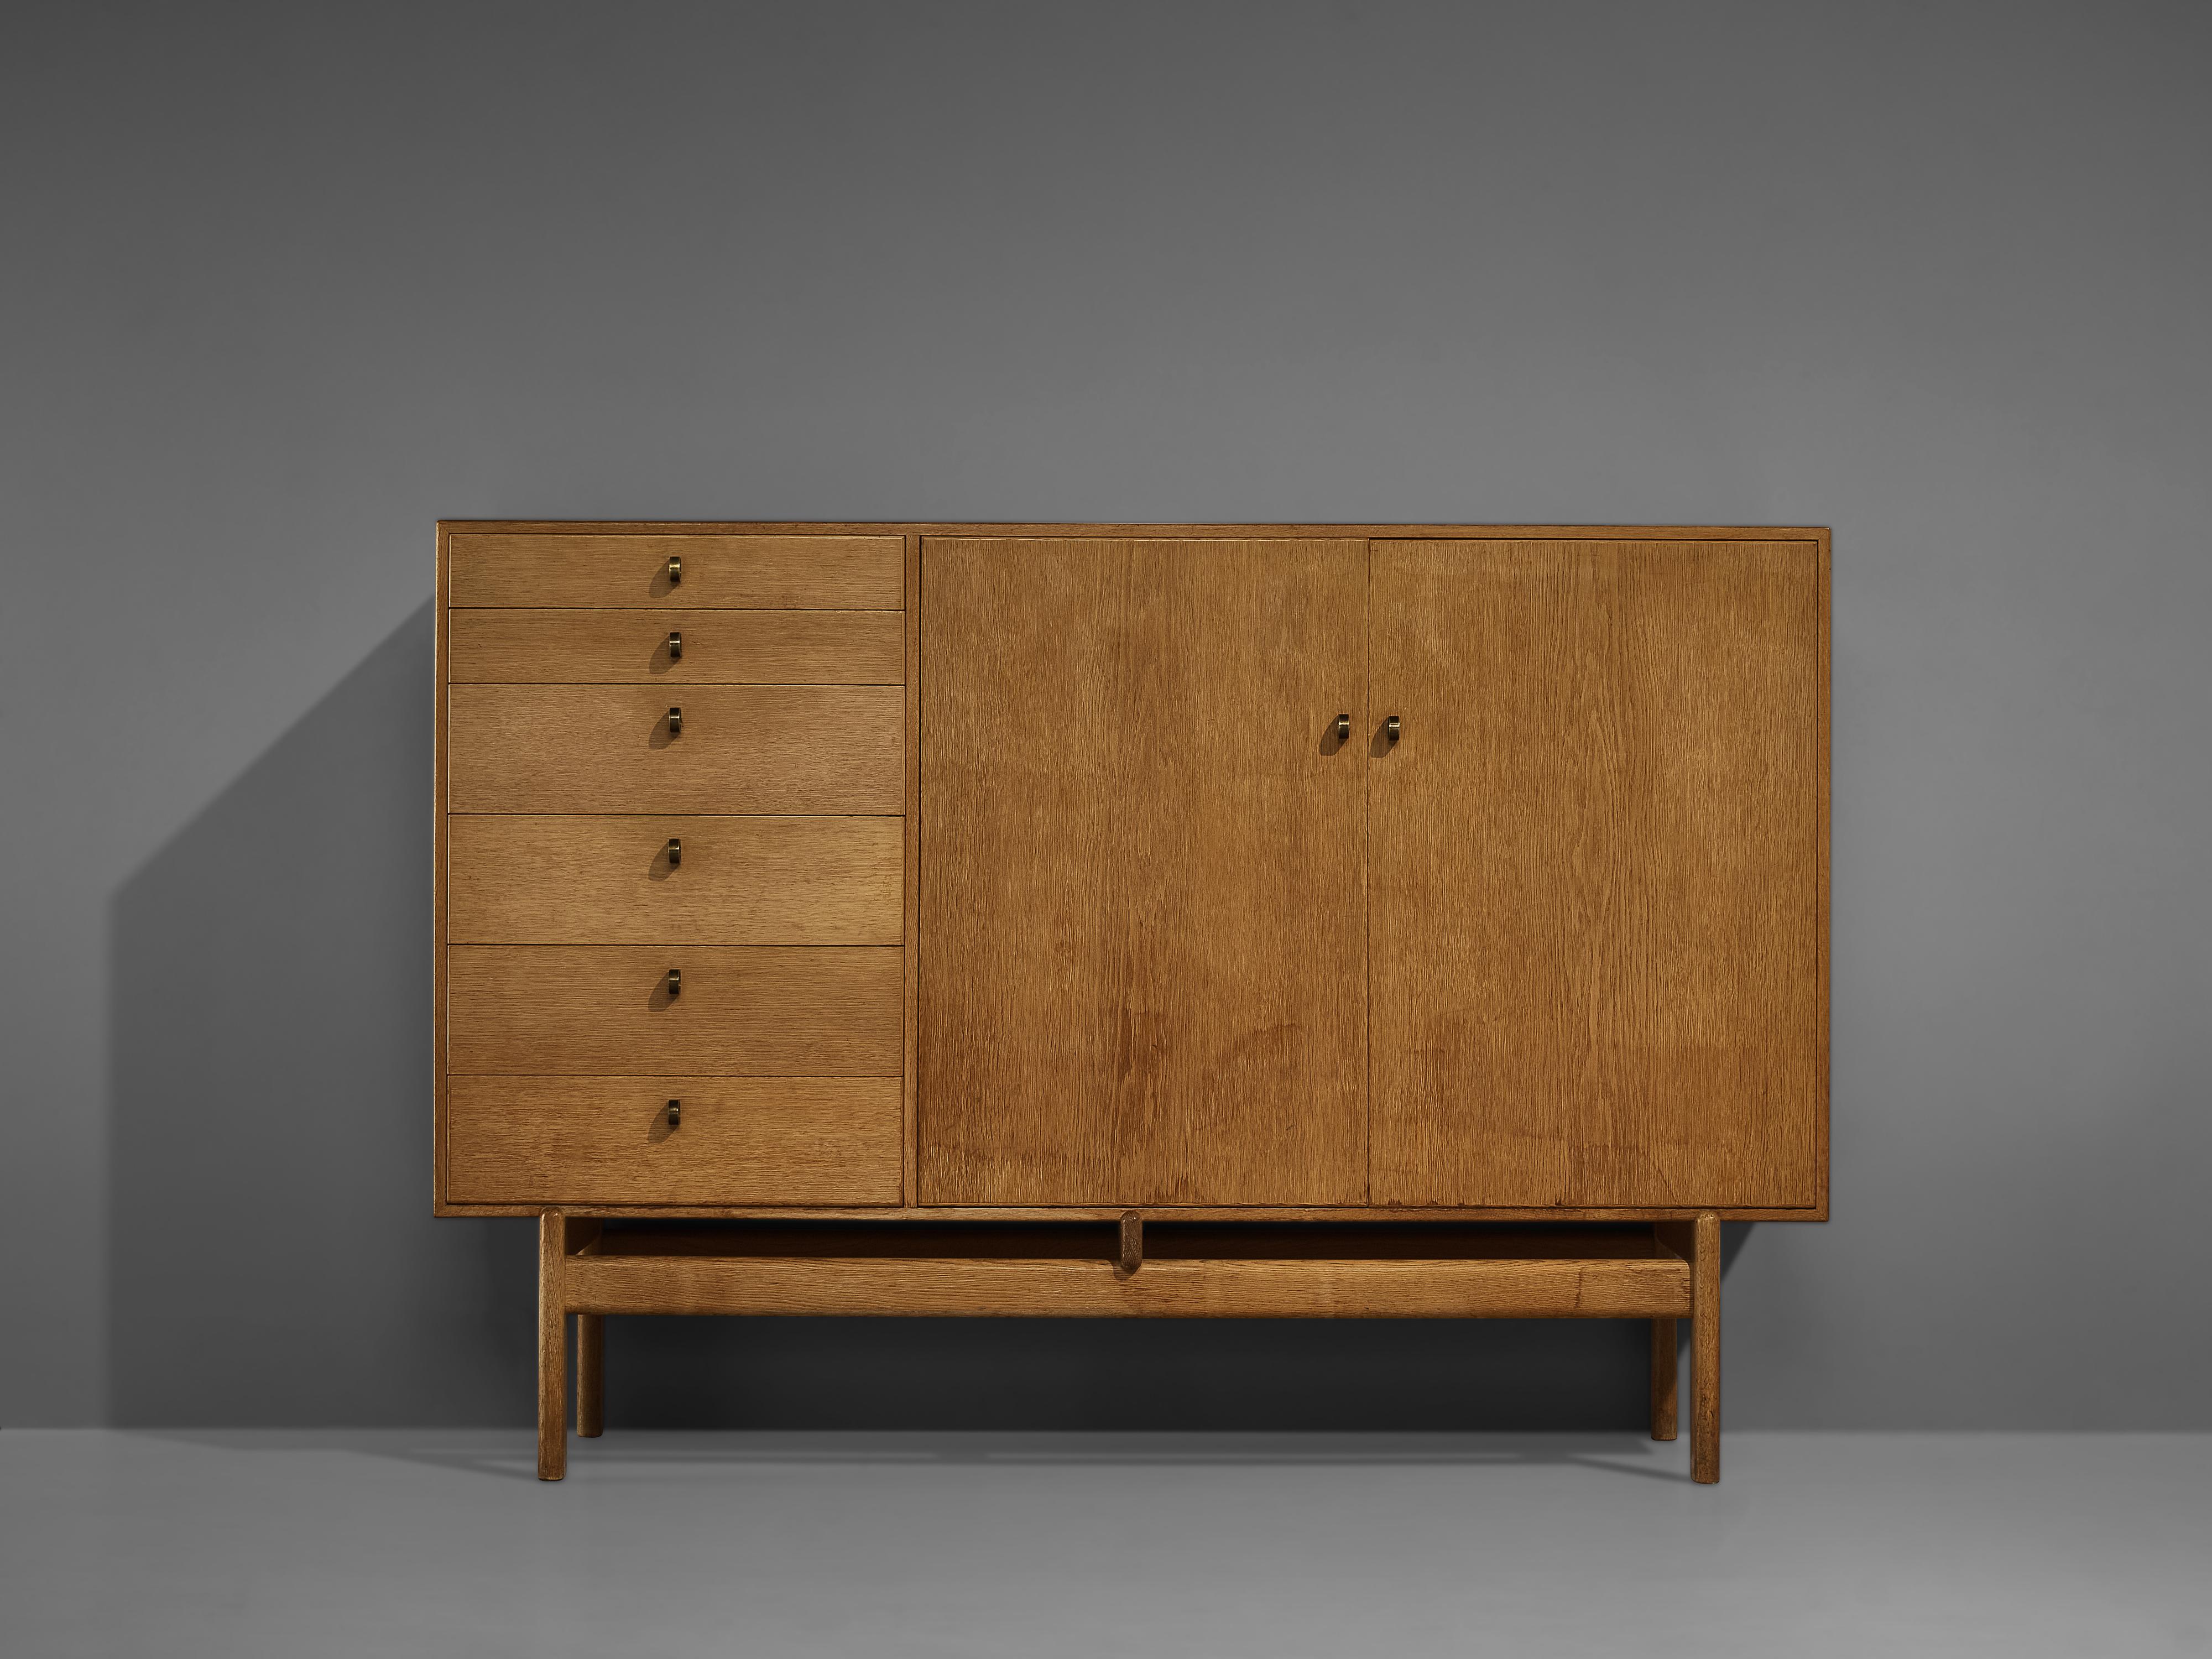 Tove and Edvard Kindt-Larsen for Illums Bolighus København, cabinet with drawers, oak, brass, Denmark, design 1961

Danish designer couple Tove and Edvard Kindt-Larsen designed this cabinet with drawers in 1961. It has a well-structured front with a